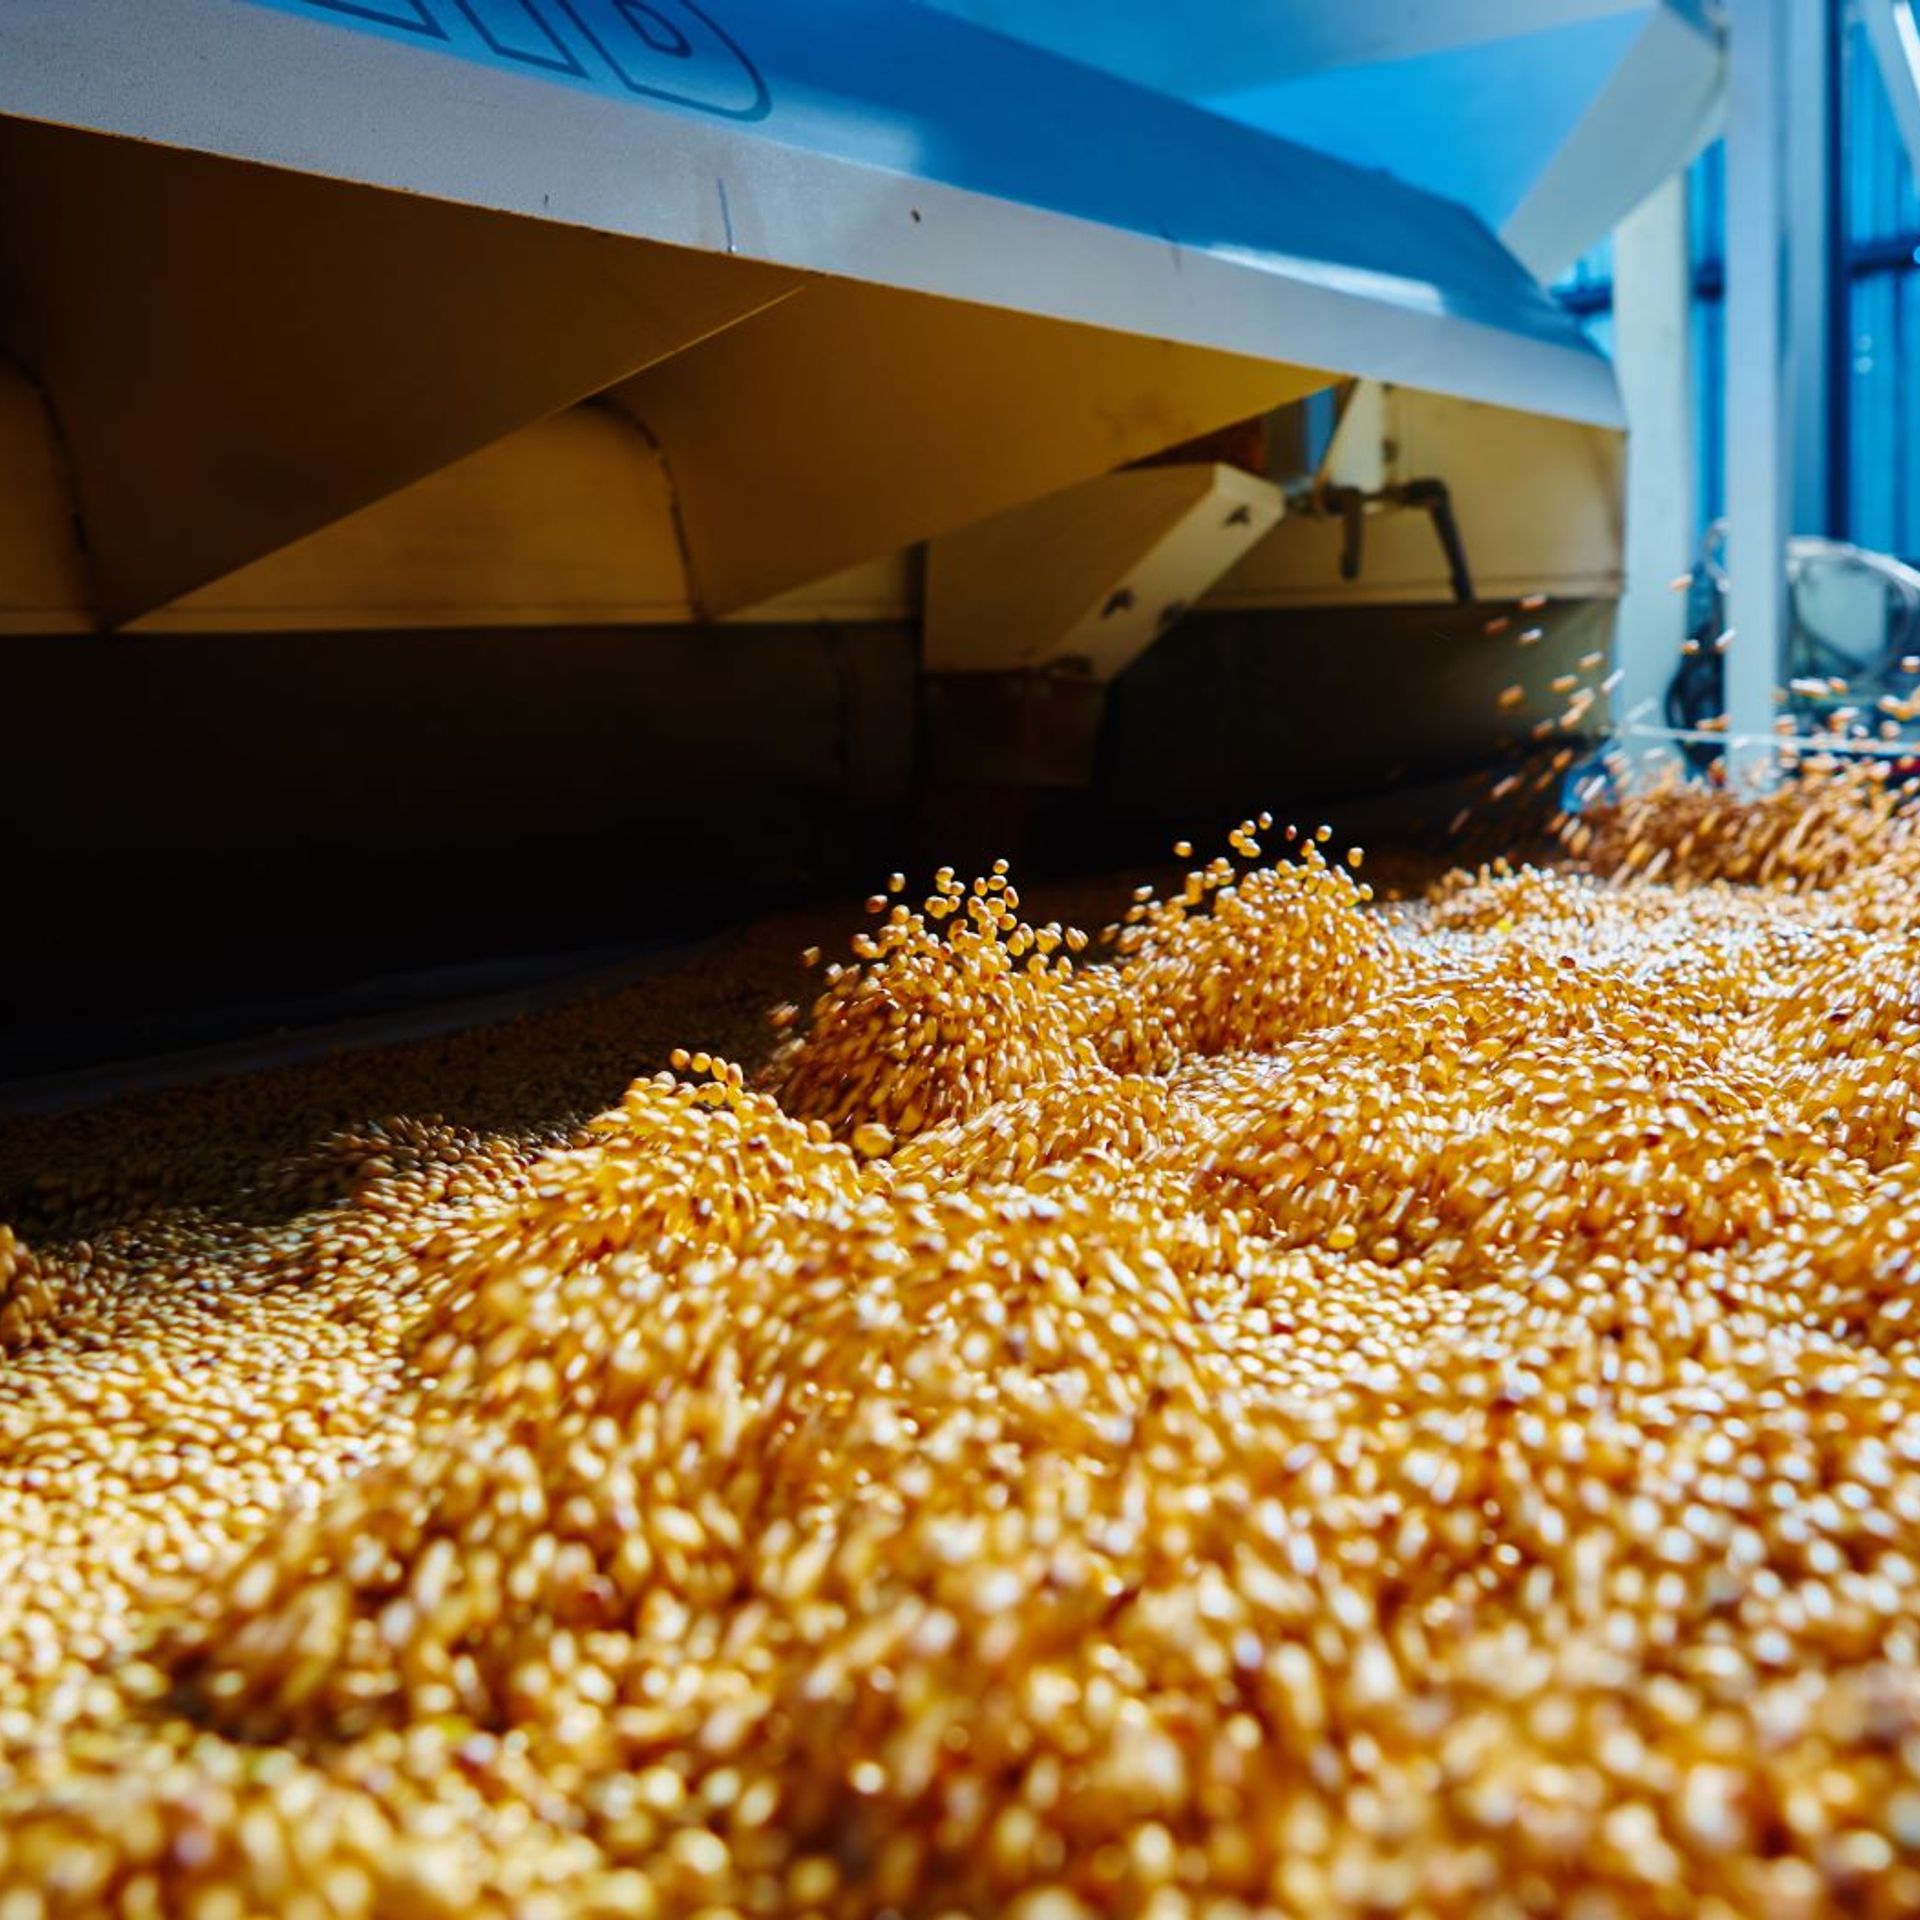 Image of a compound feed manufacturing plant processing soybeans